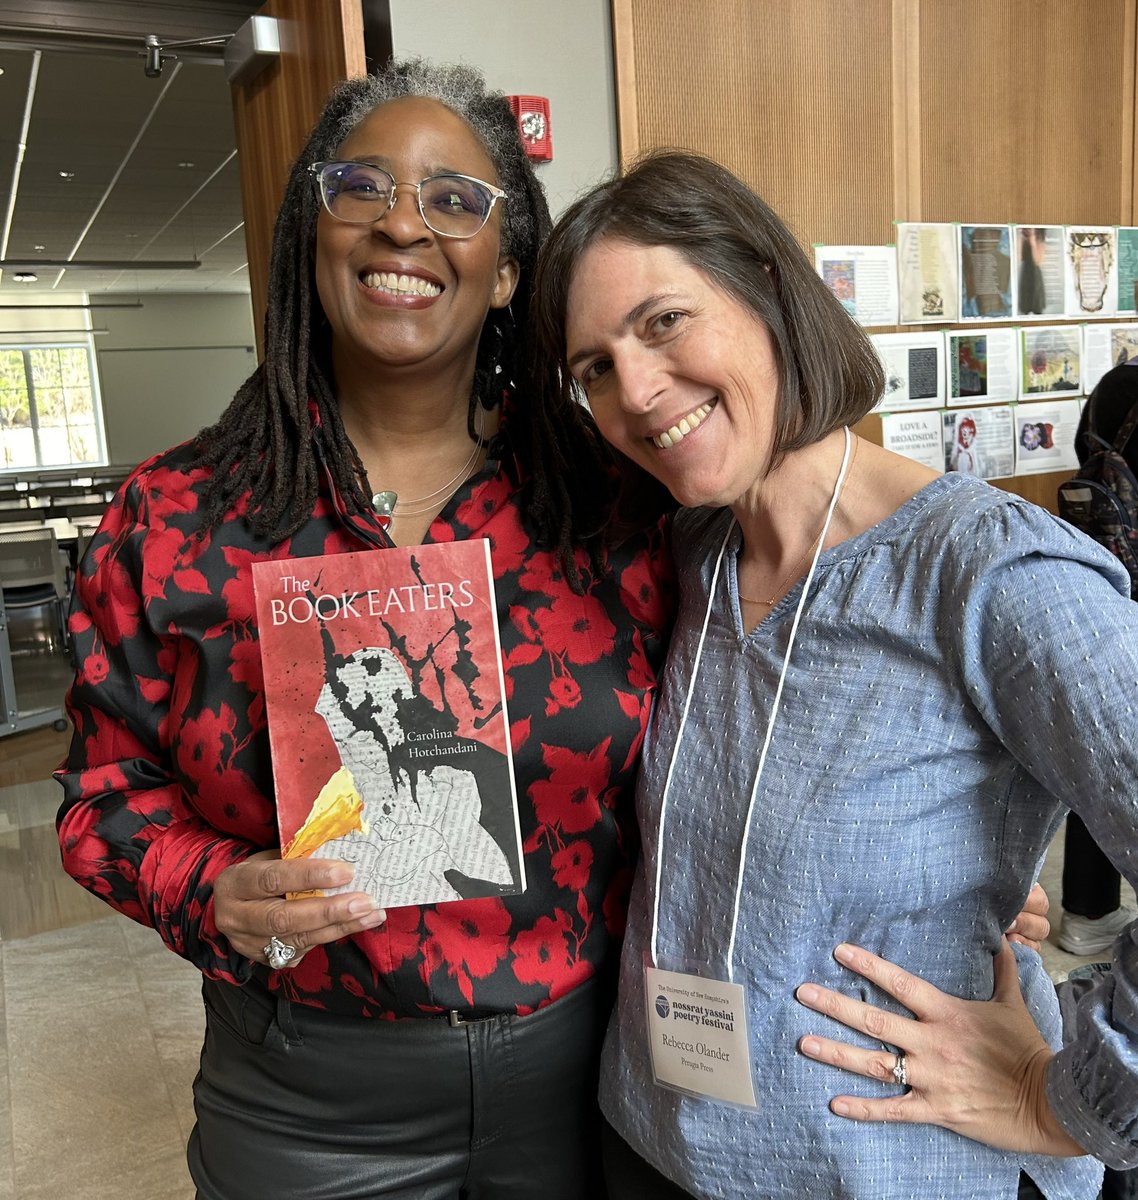 Camille Dungy showing Carolina Hotchandani’s THE BOOK EATERS some love yesterday at the Perugia table at the Nossrat Yassini Poetry Fest. ♥️ @CHotchandani @yasfestunh